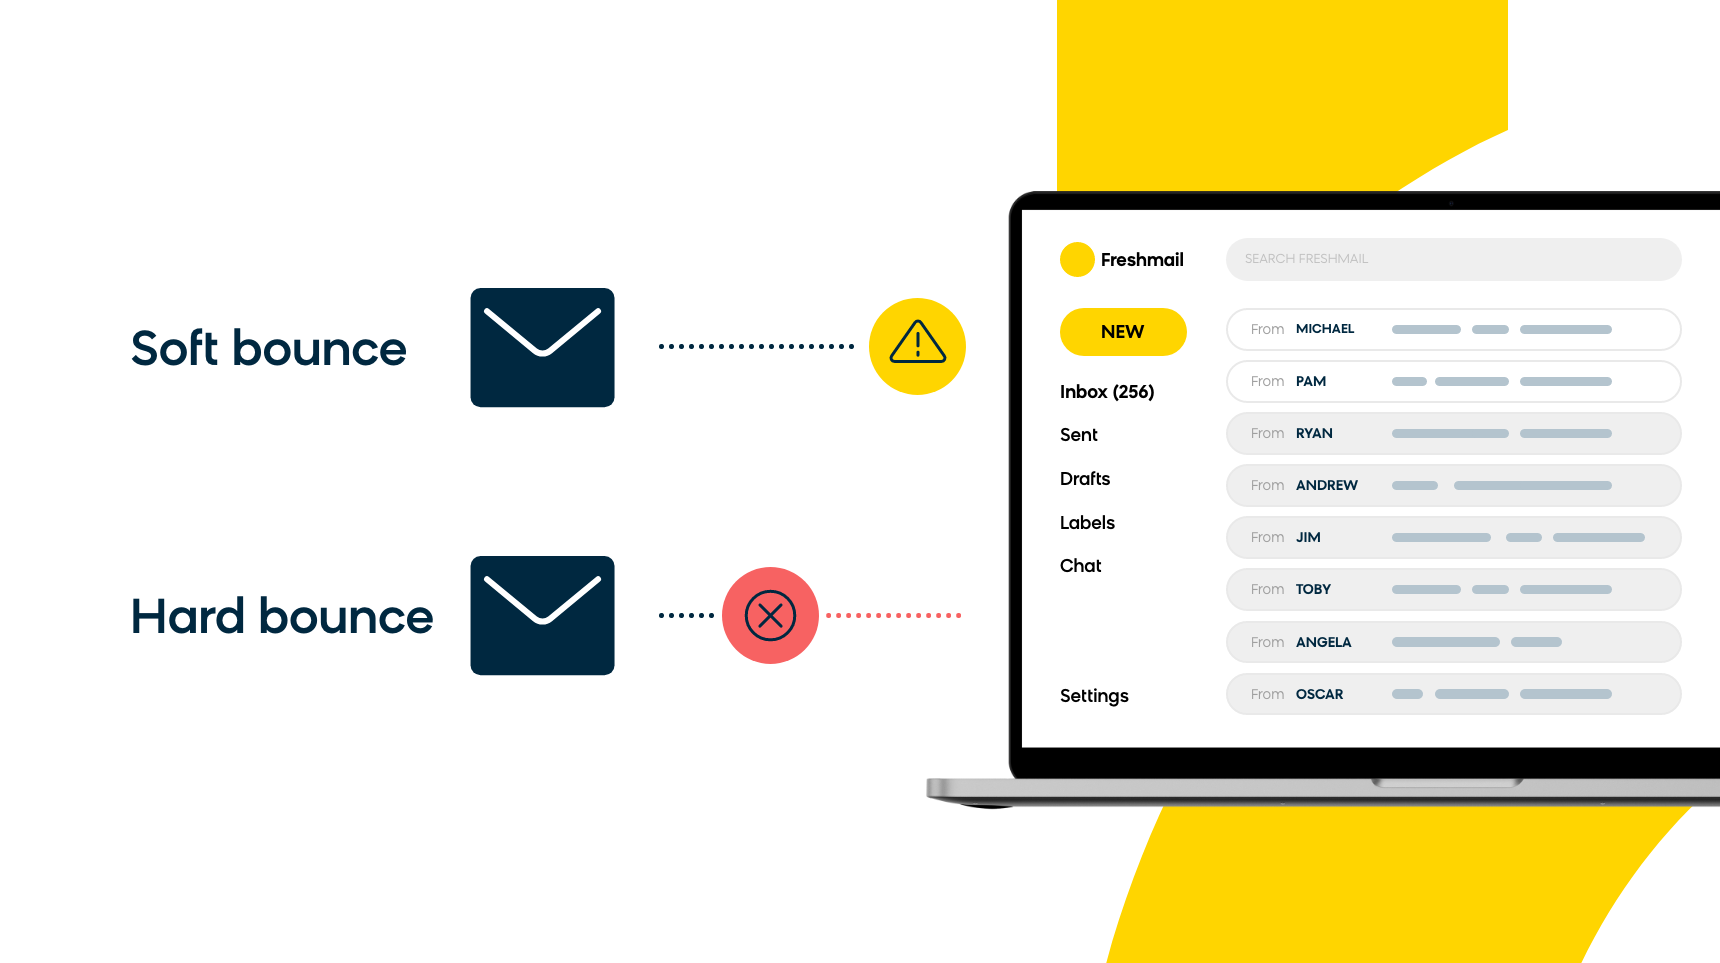 Regularly checking your lists for soft and hard bounces can help with email deliverability.